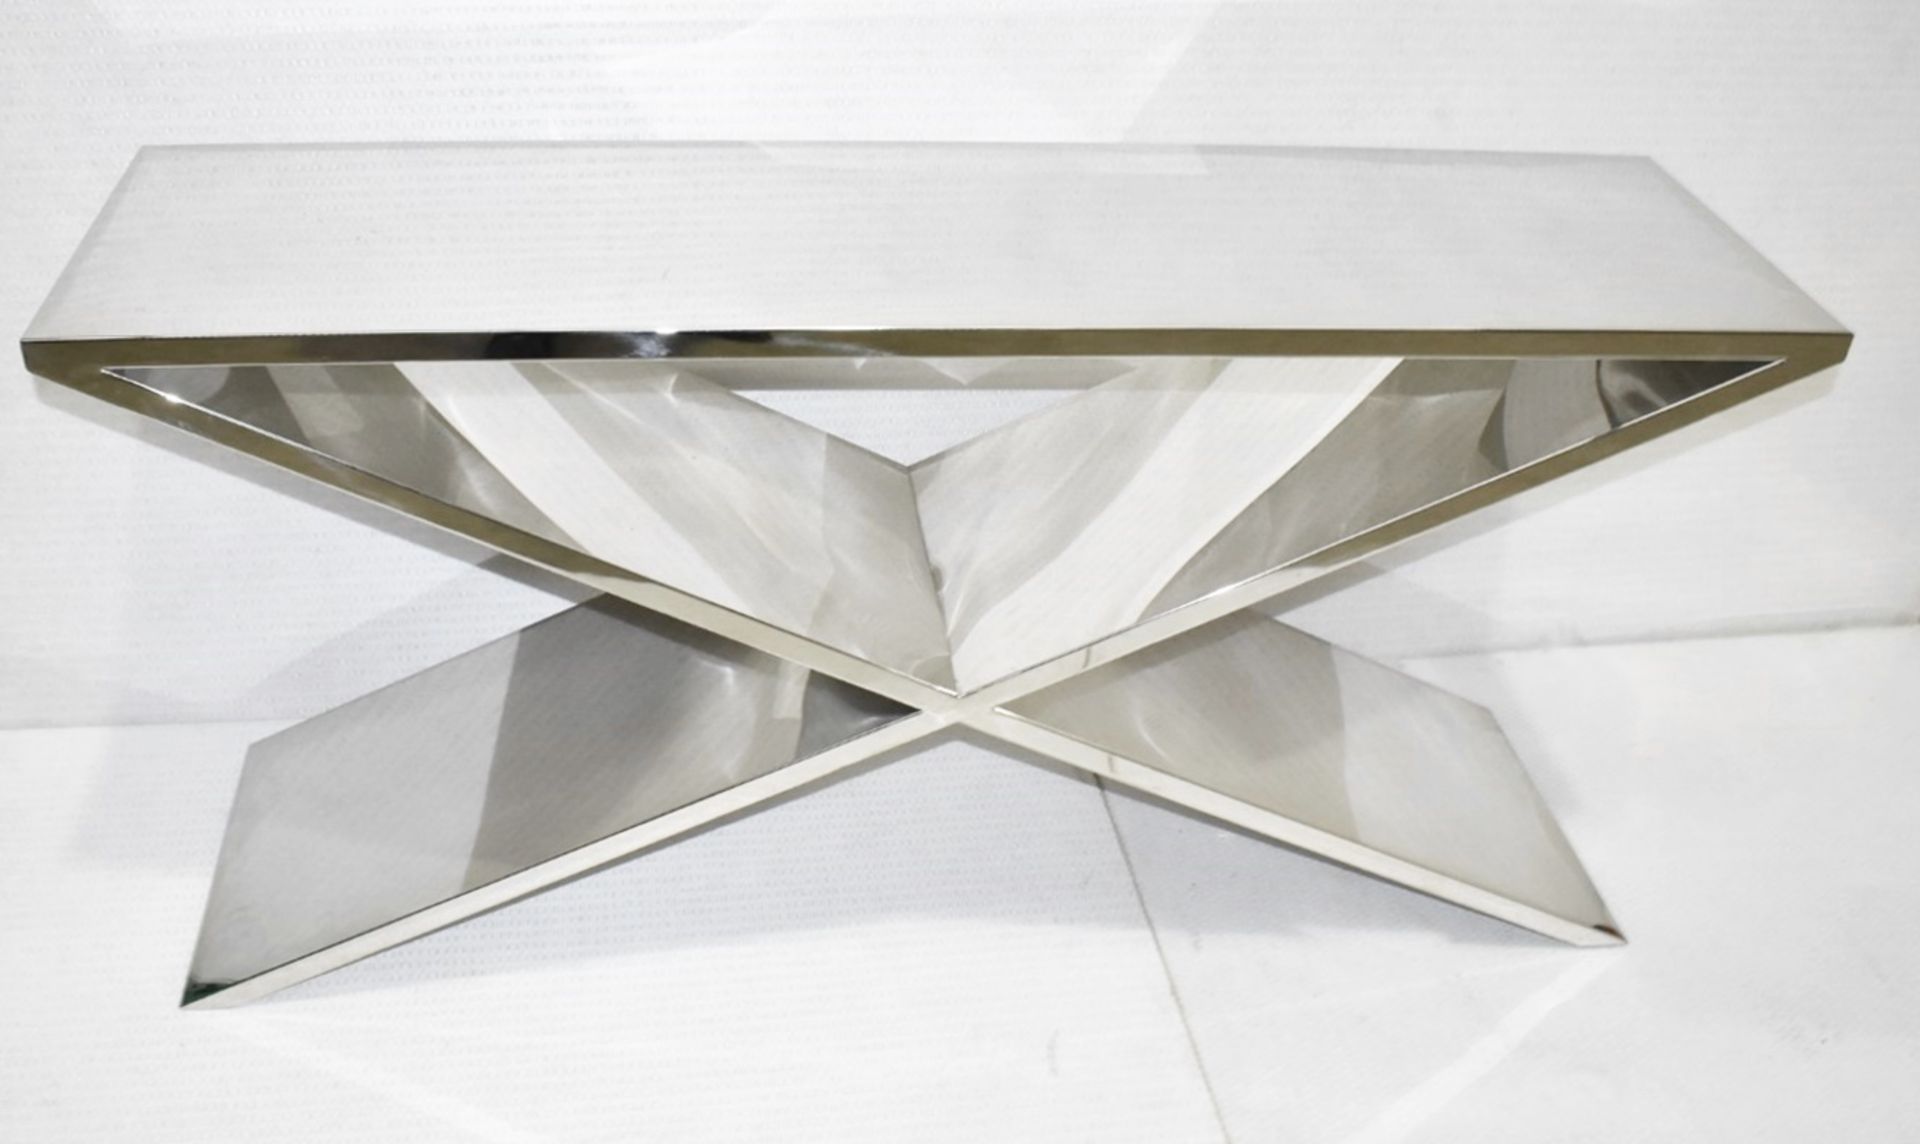 1 x EICHHOLTZ 'Metropole' Luxury Handcrafted Mirrored Console Table - Original Price £2,810 - Image 10 of 10